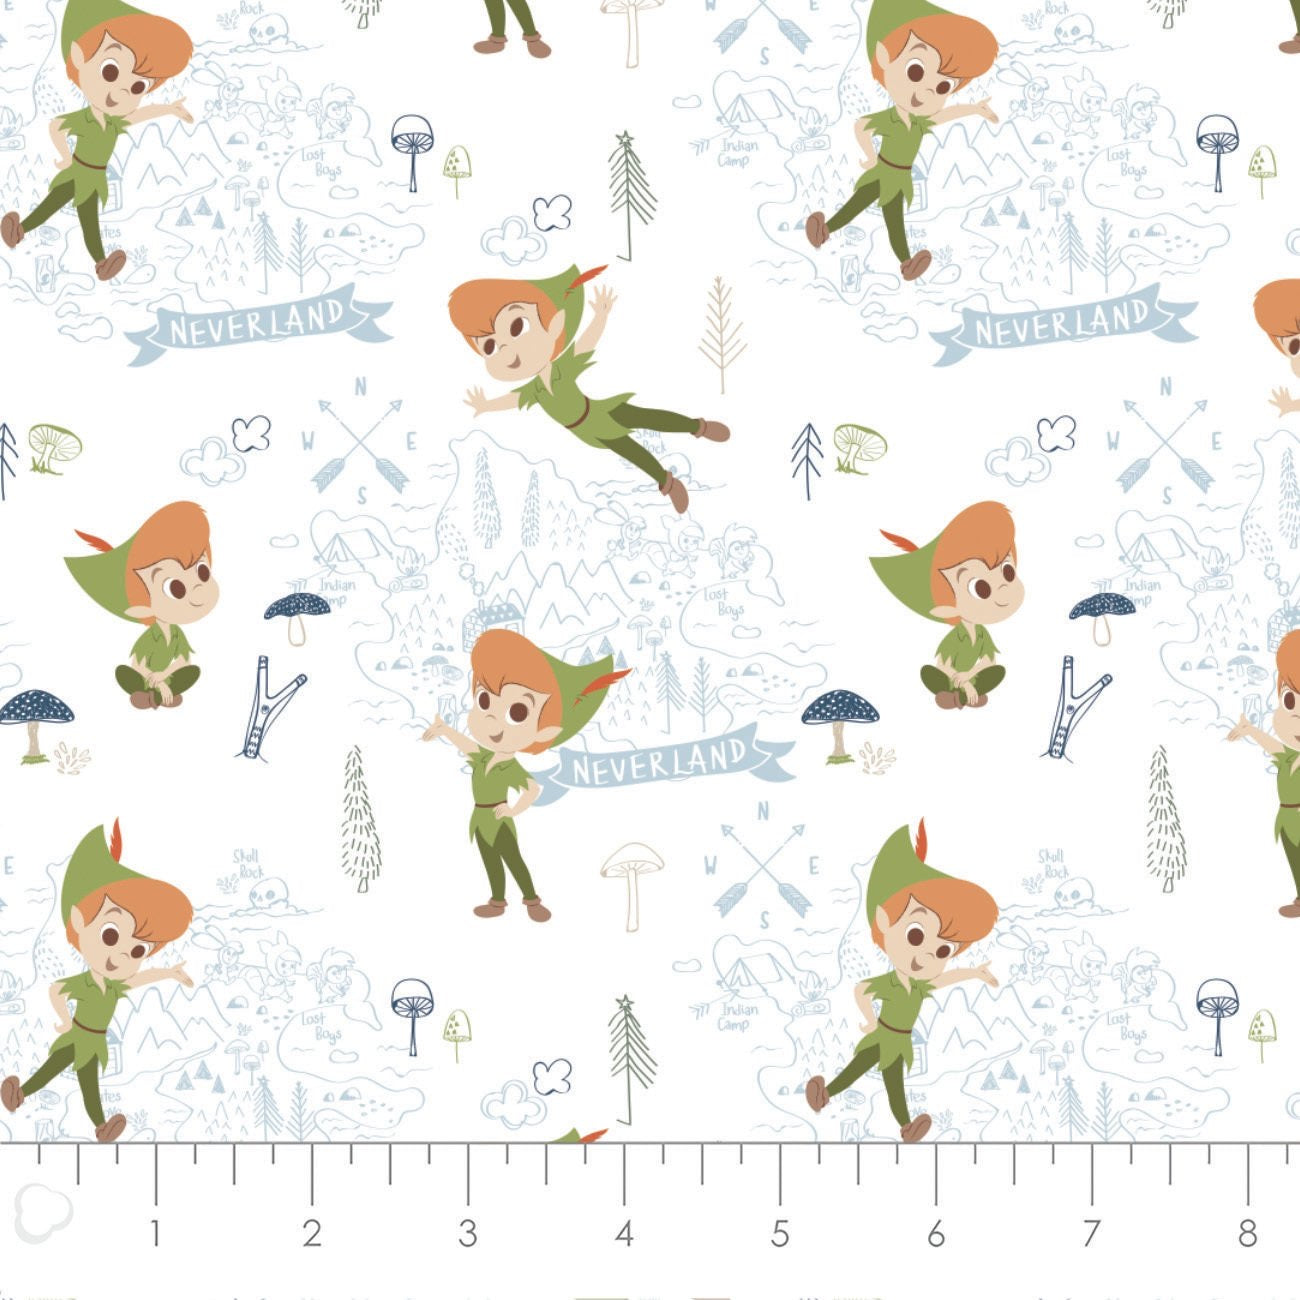 Camelot Fabrics - Peter Pan and Tinker Bell Collection - Neverland Adventures  - White